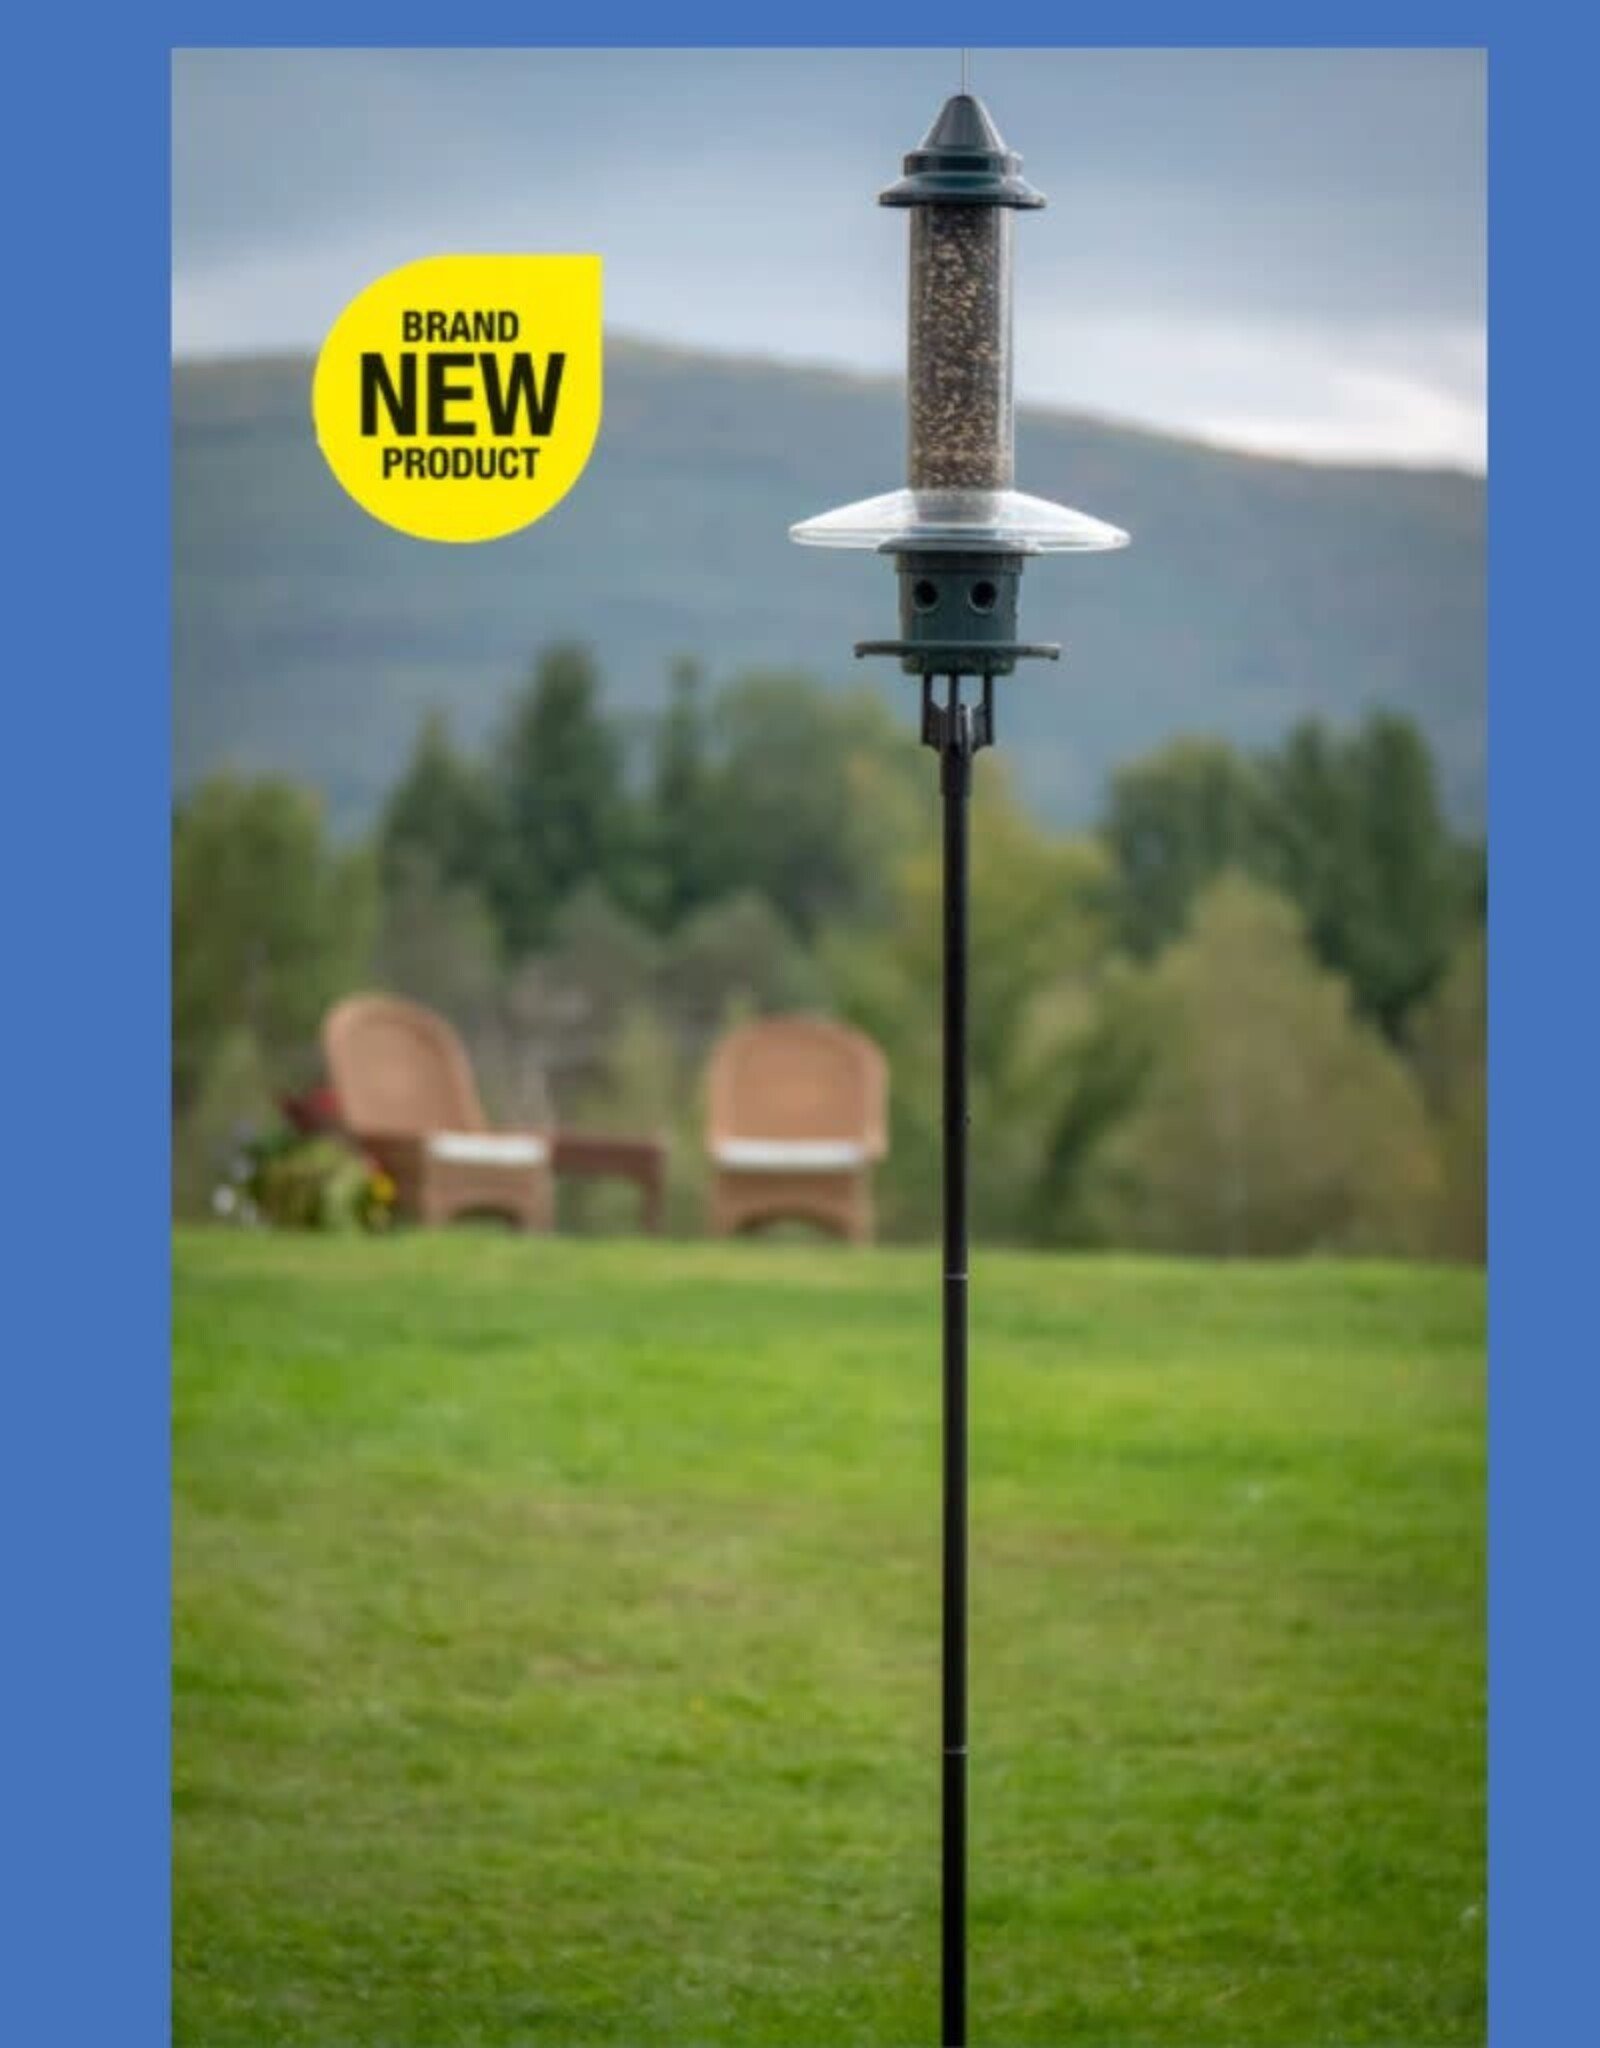 Brome/Squirrel Buster SQB1108 Birds Up Single Pole Kit- feeder and tray not included